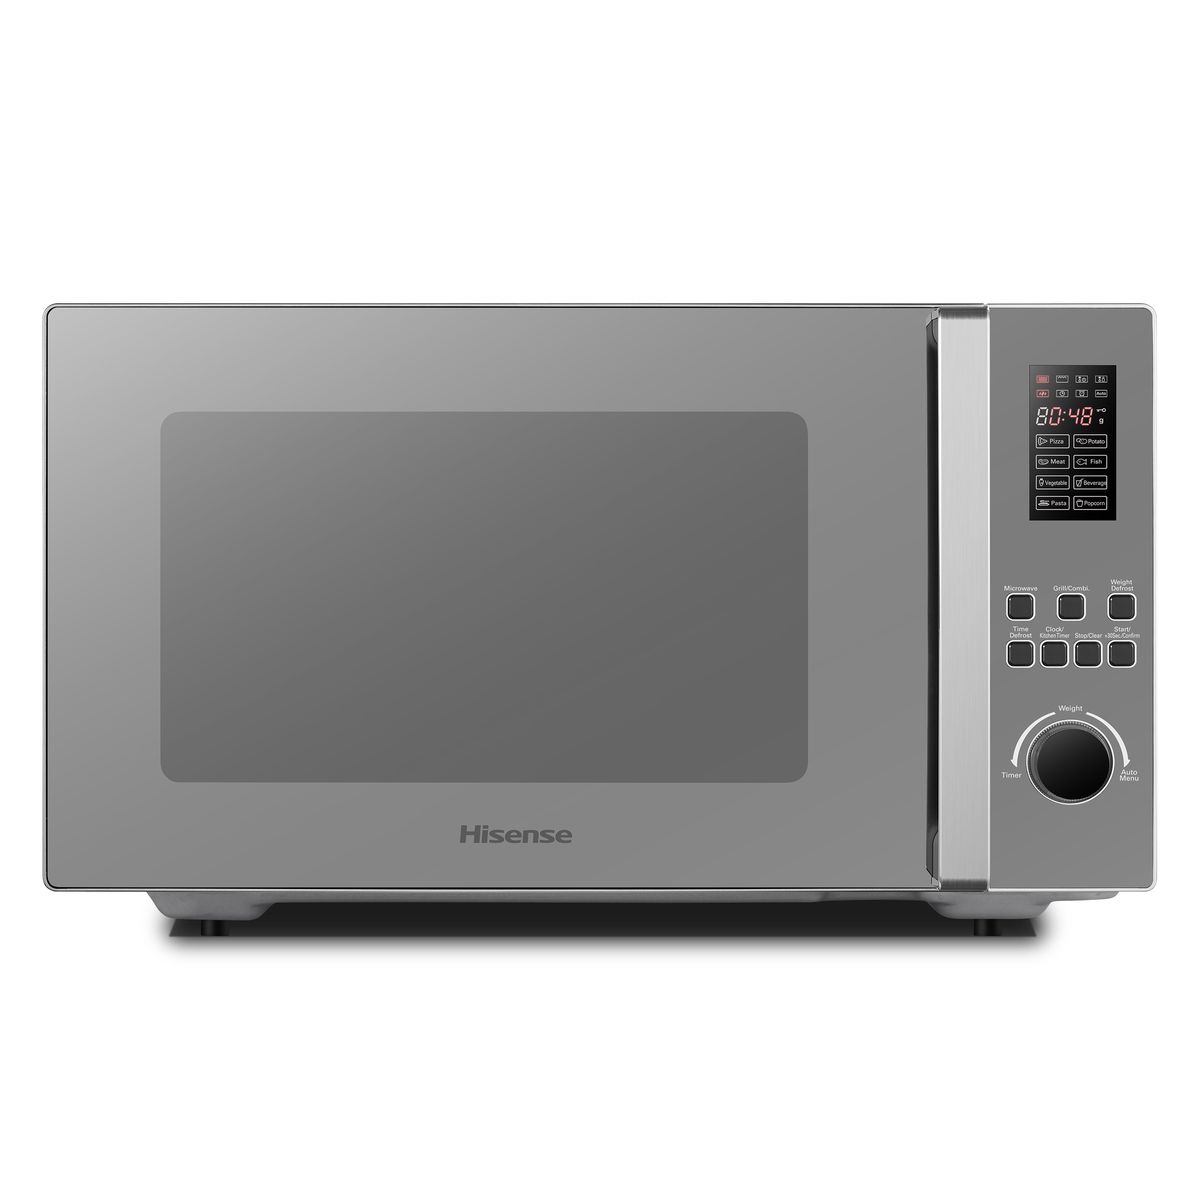 Hisense-45L Electronic Grill Microwave Oven-1100W